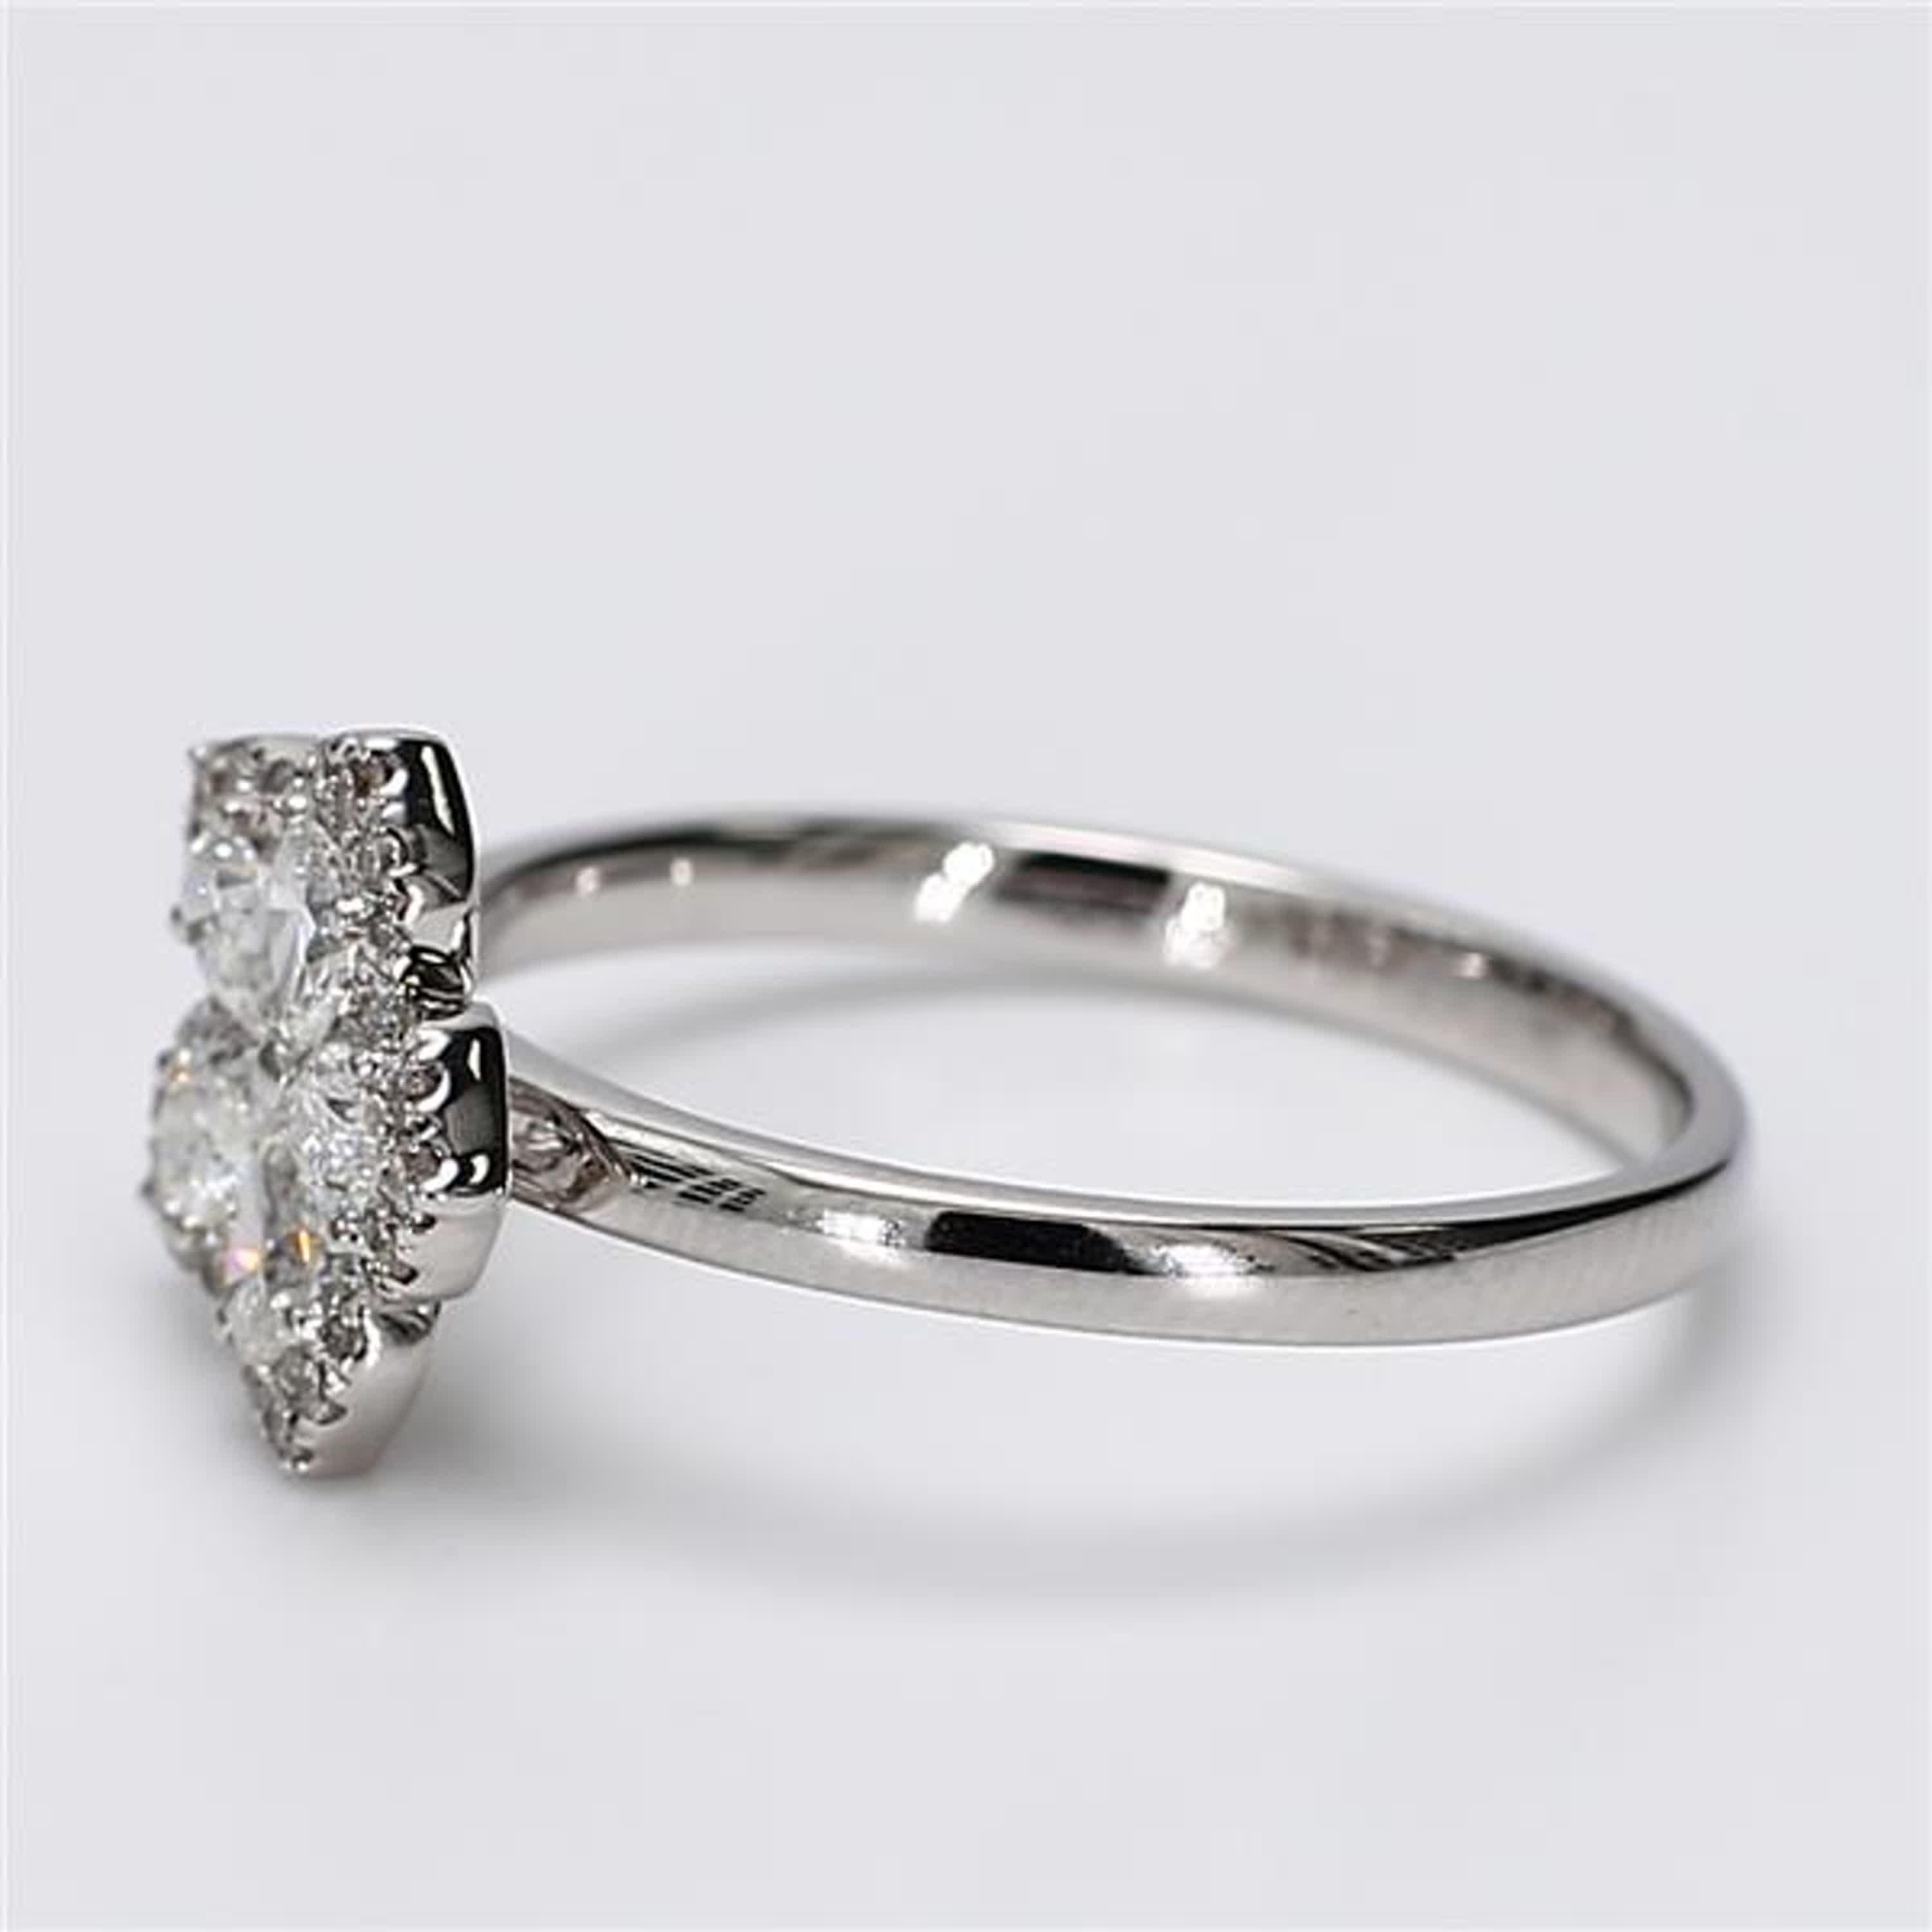 Contemporary Natural White Pear and Round Diamond .52 Carat TW White Gold Fashion Ring